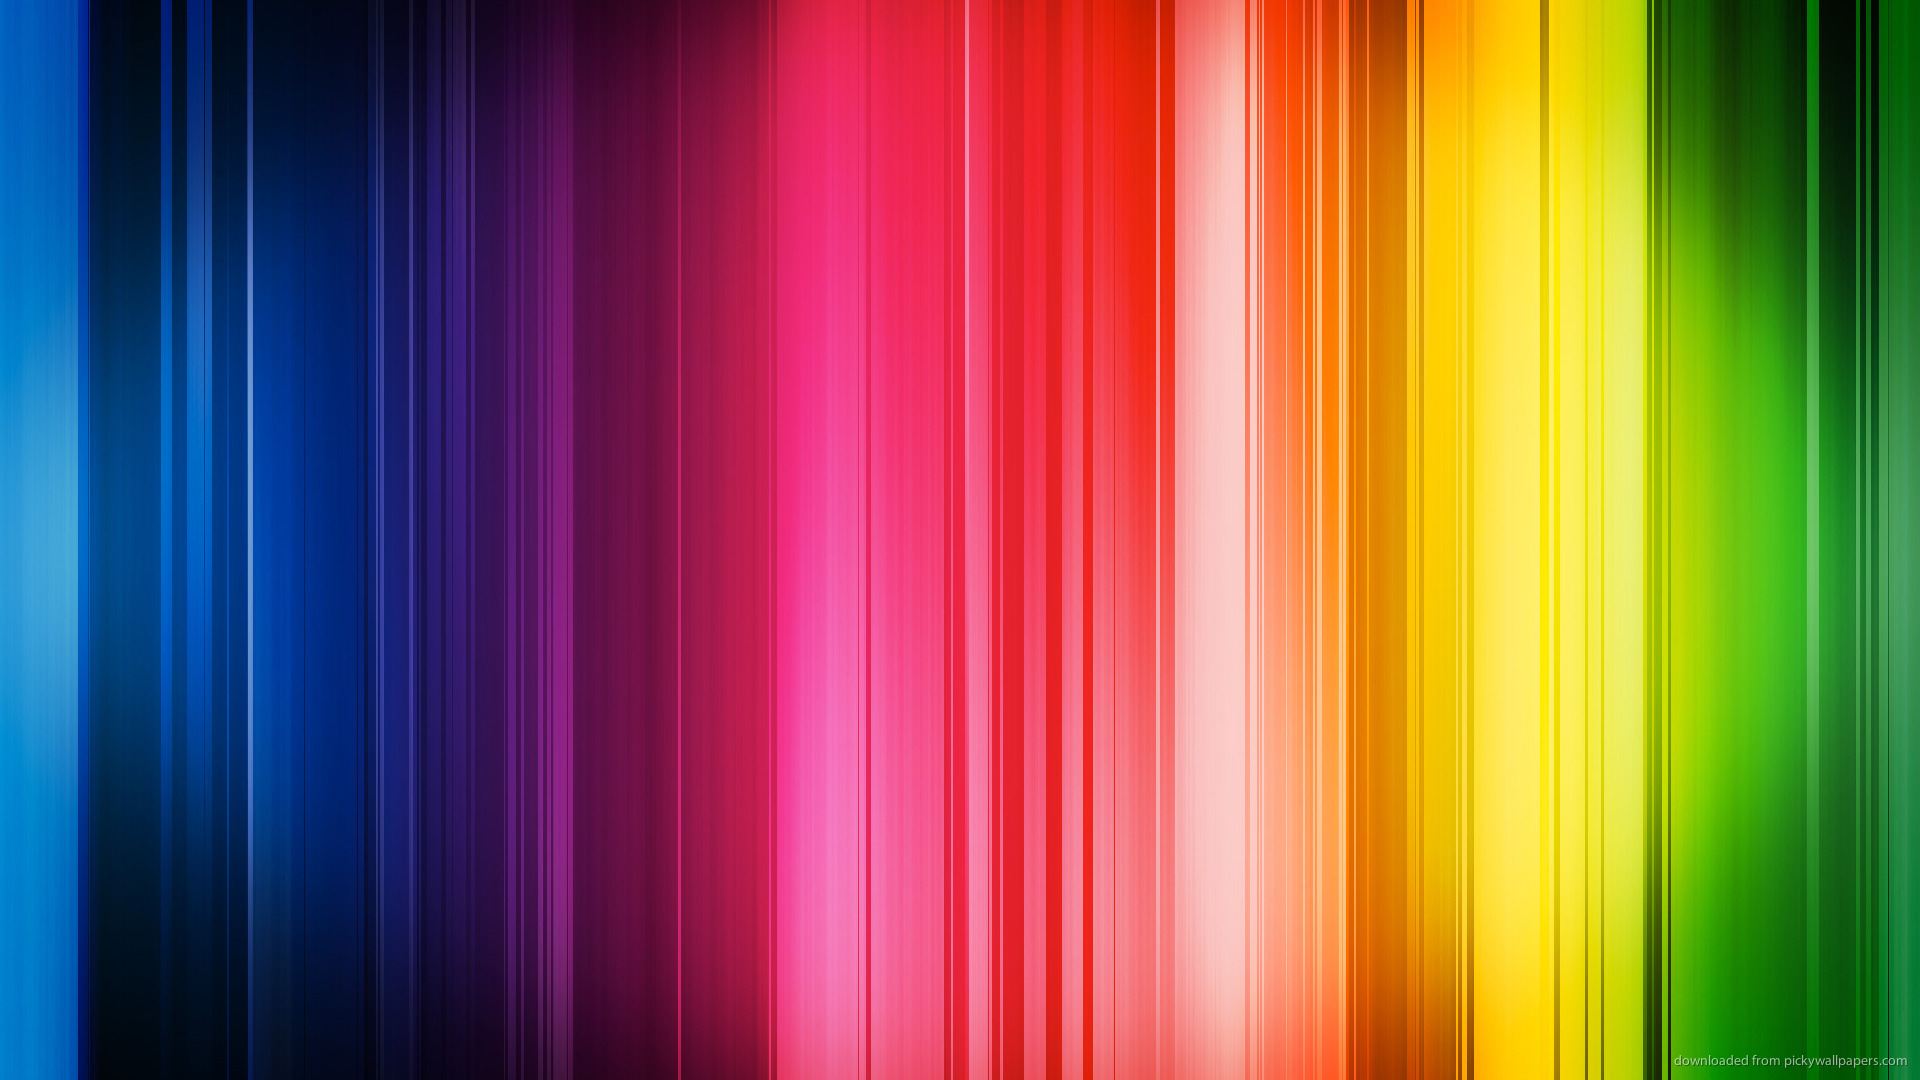 background colorful twitter stripes backgrounds 1920x1080 1920x1080